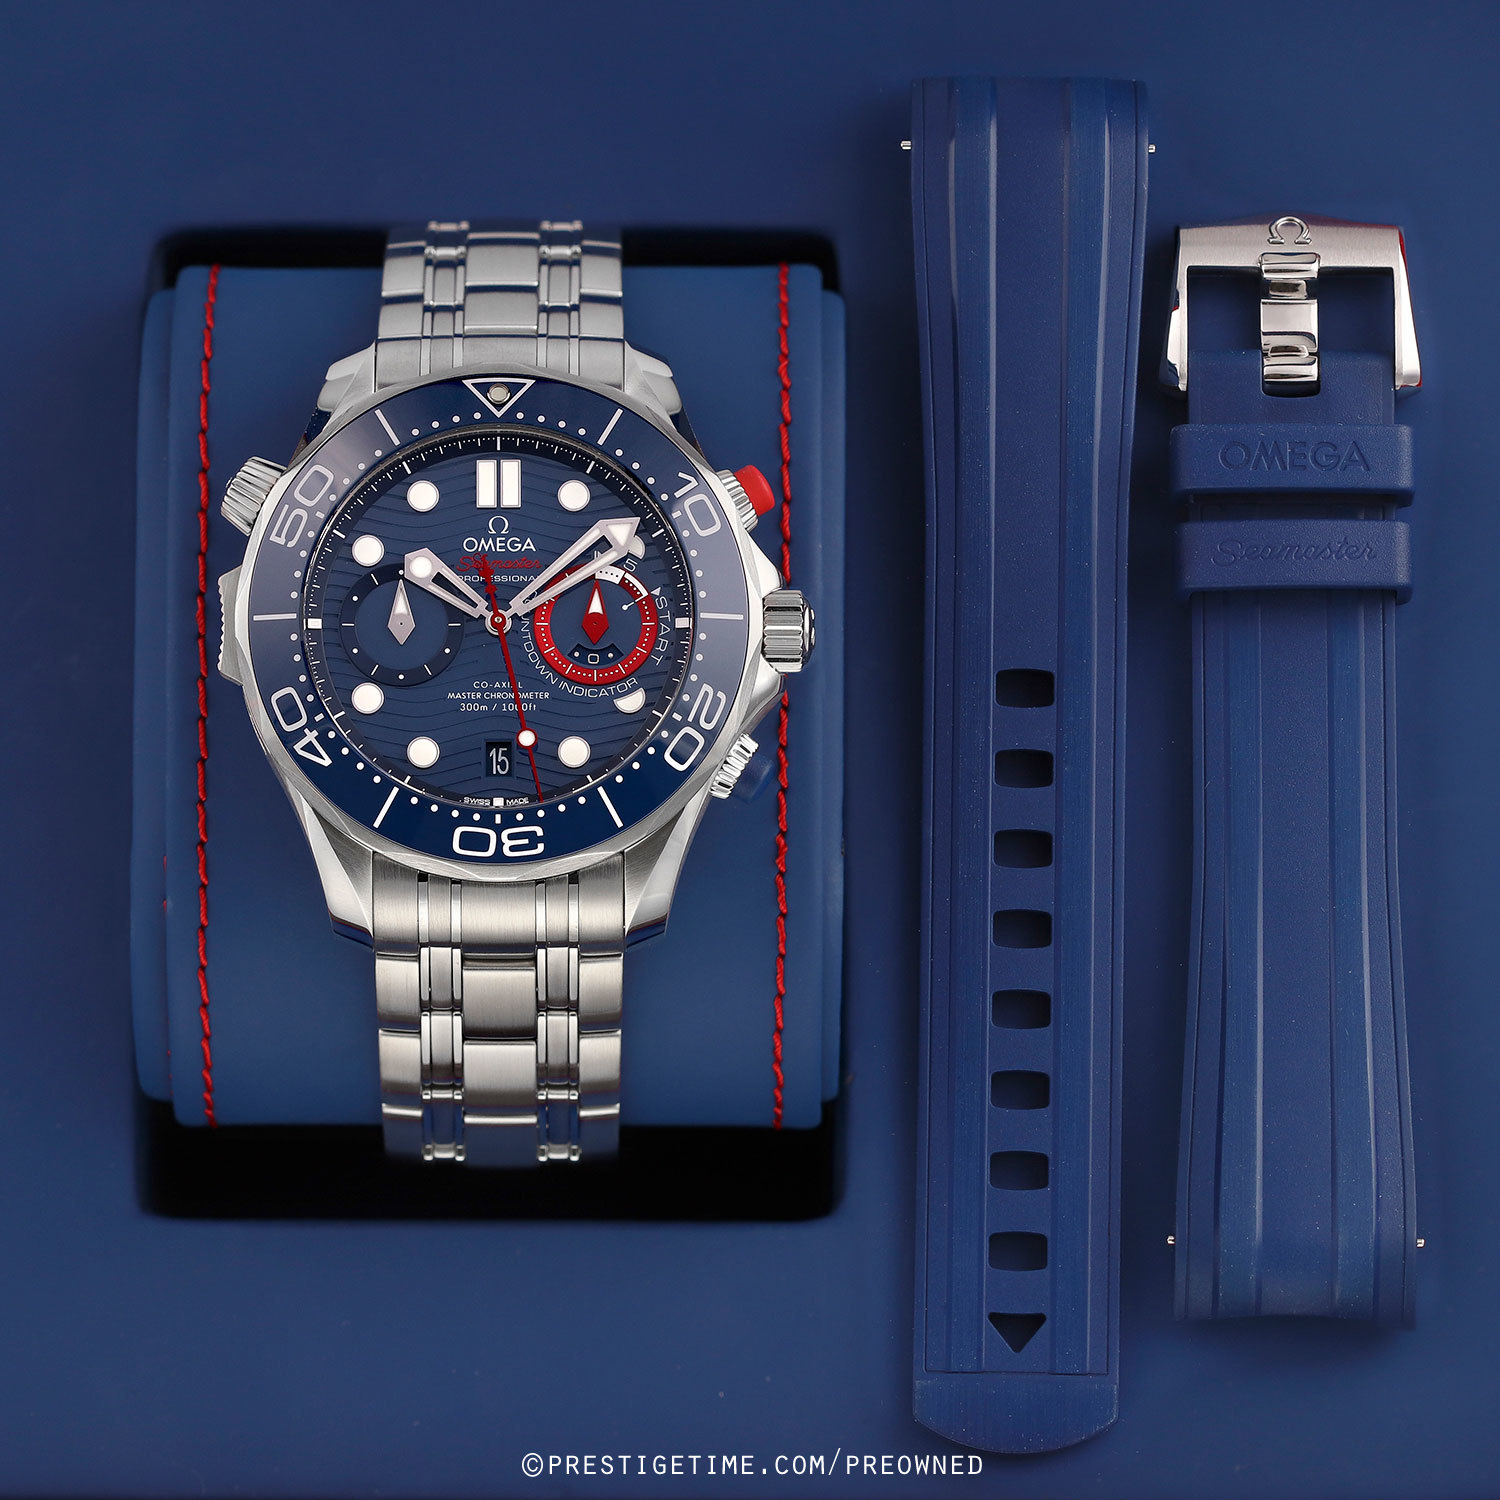 Omega Seamaster Diver 300M Chronograph America's Cup